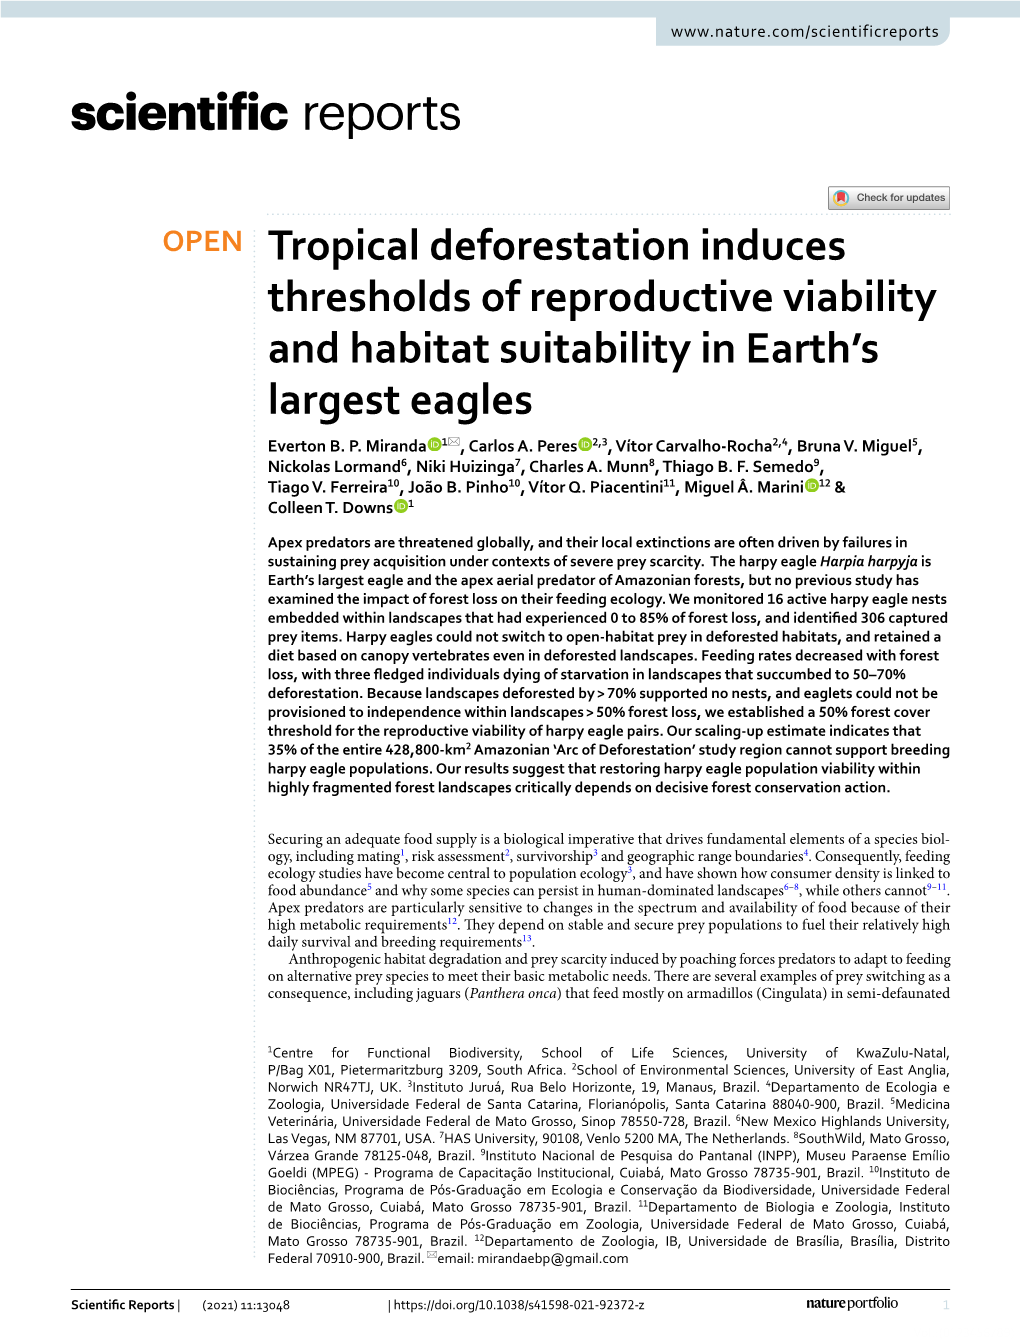 Tropical Deforestation Induces Thresholds of Reproductive Viability and Habitat Suitability in Earth’S Largest Eagles Everton B